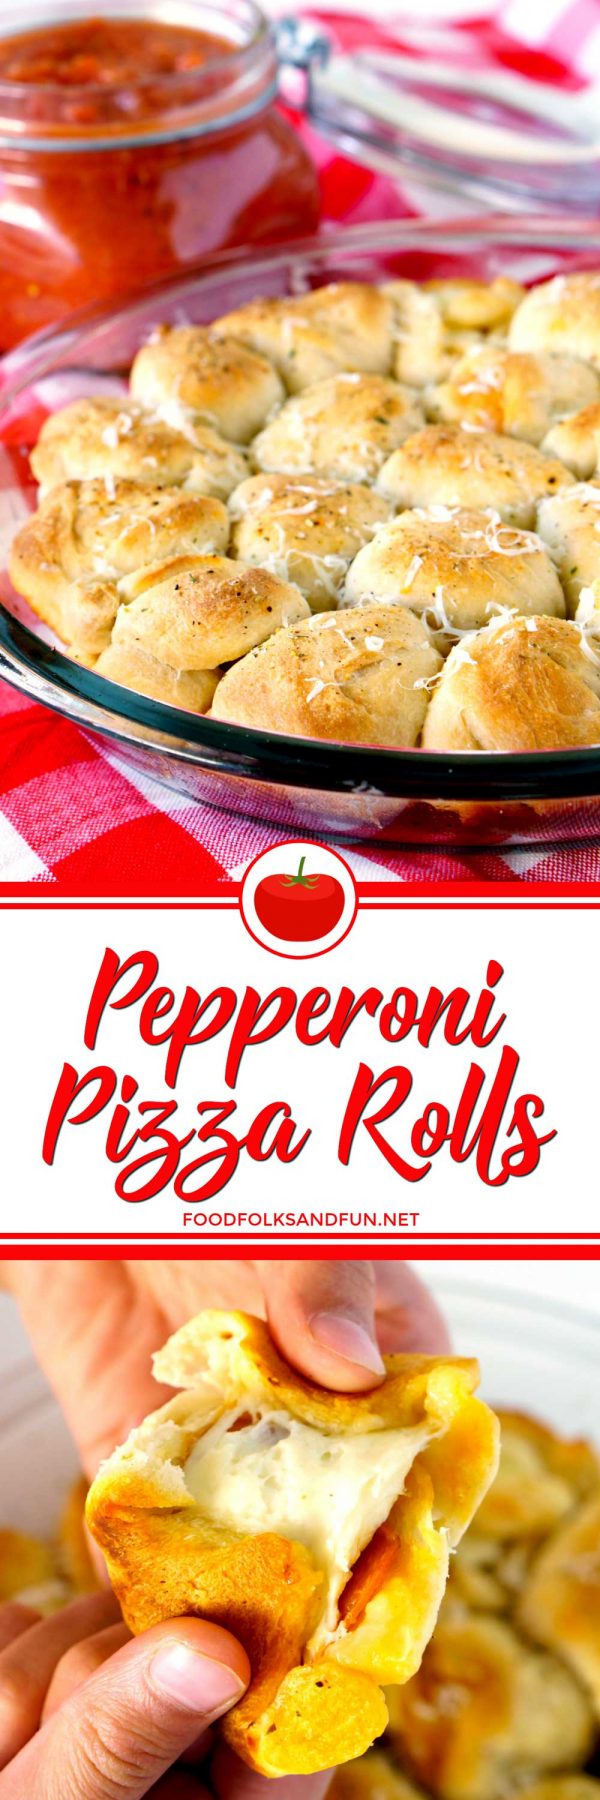 Pepperoni Pizza Rolls made in just 30 minutes.